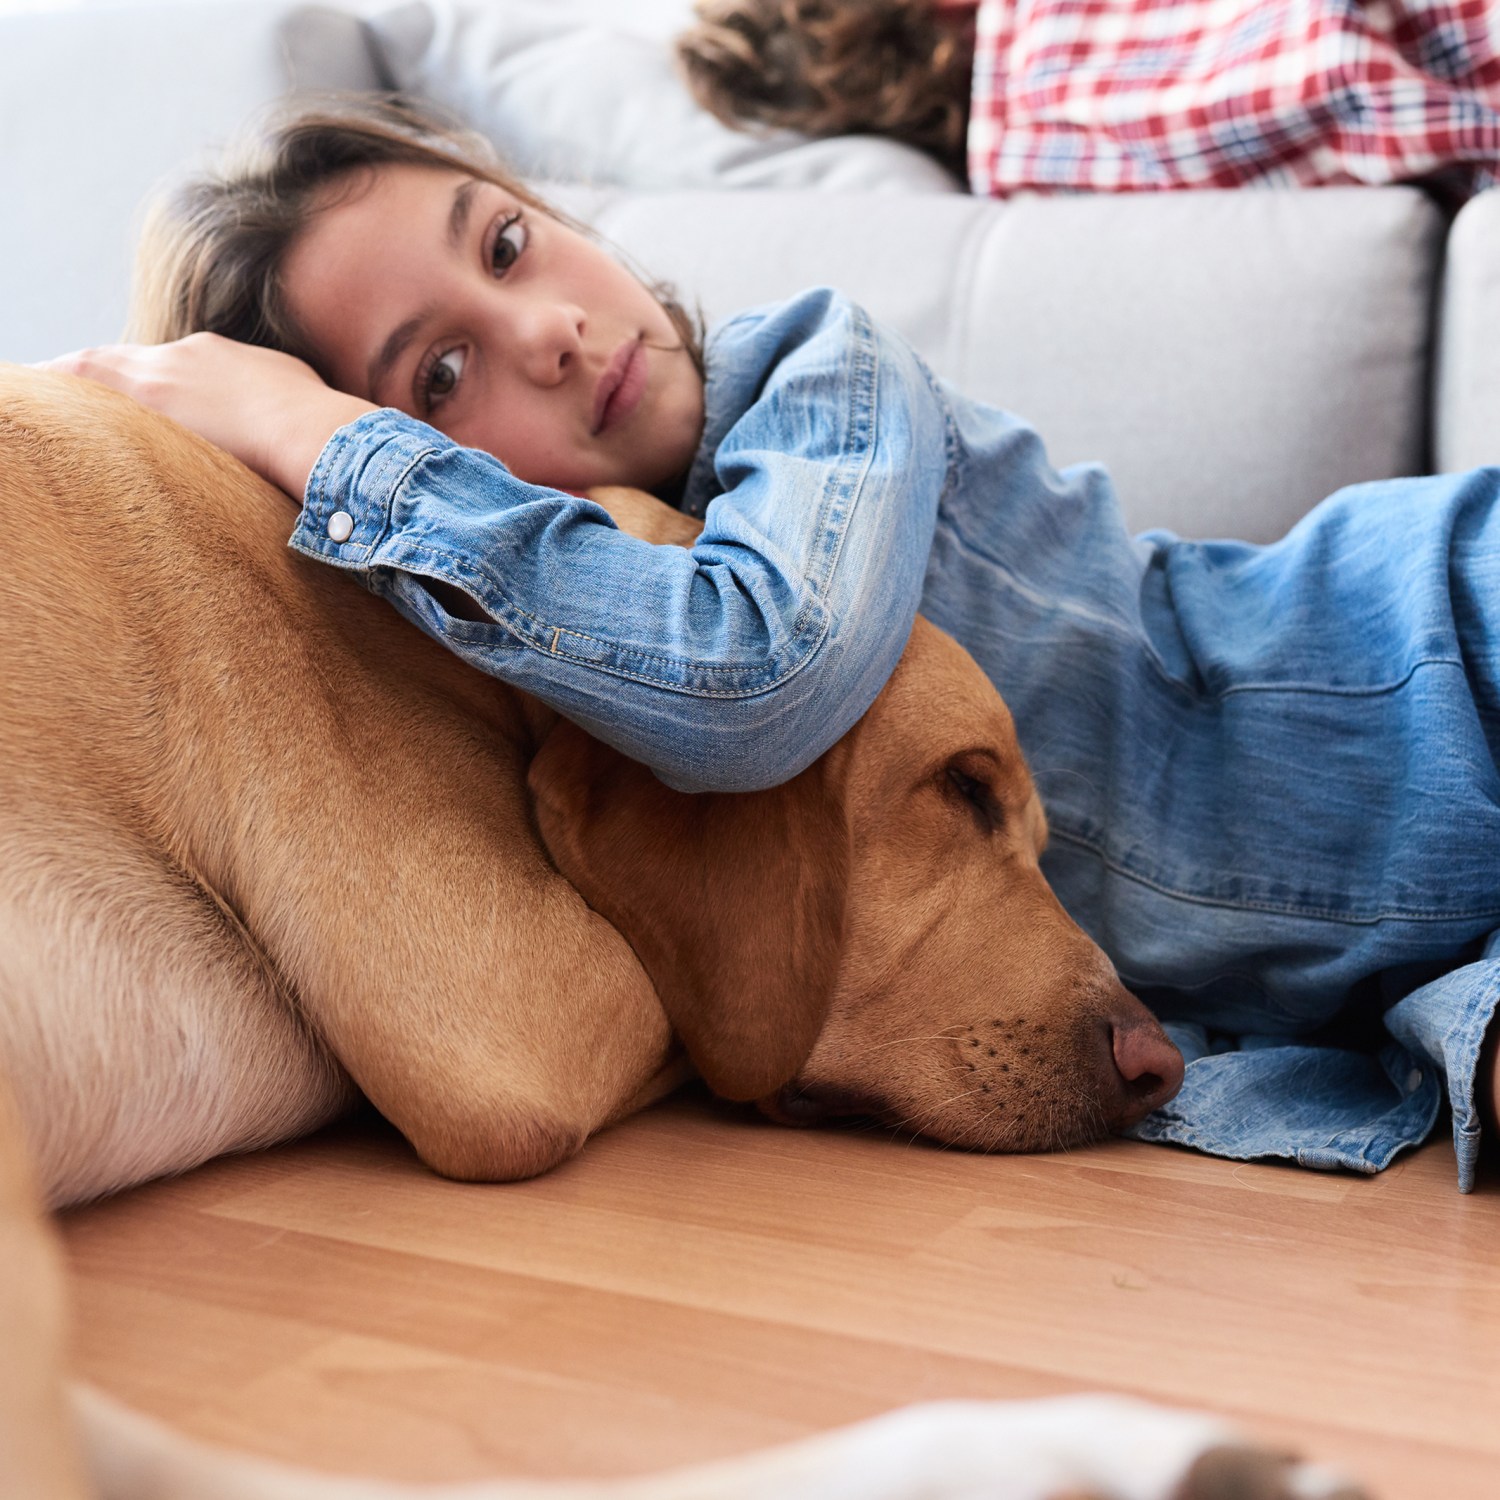 A young girl is hugging her dog on the wood floor